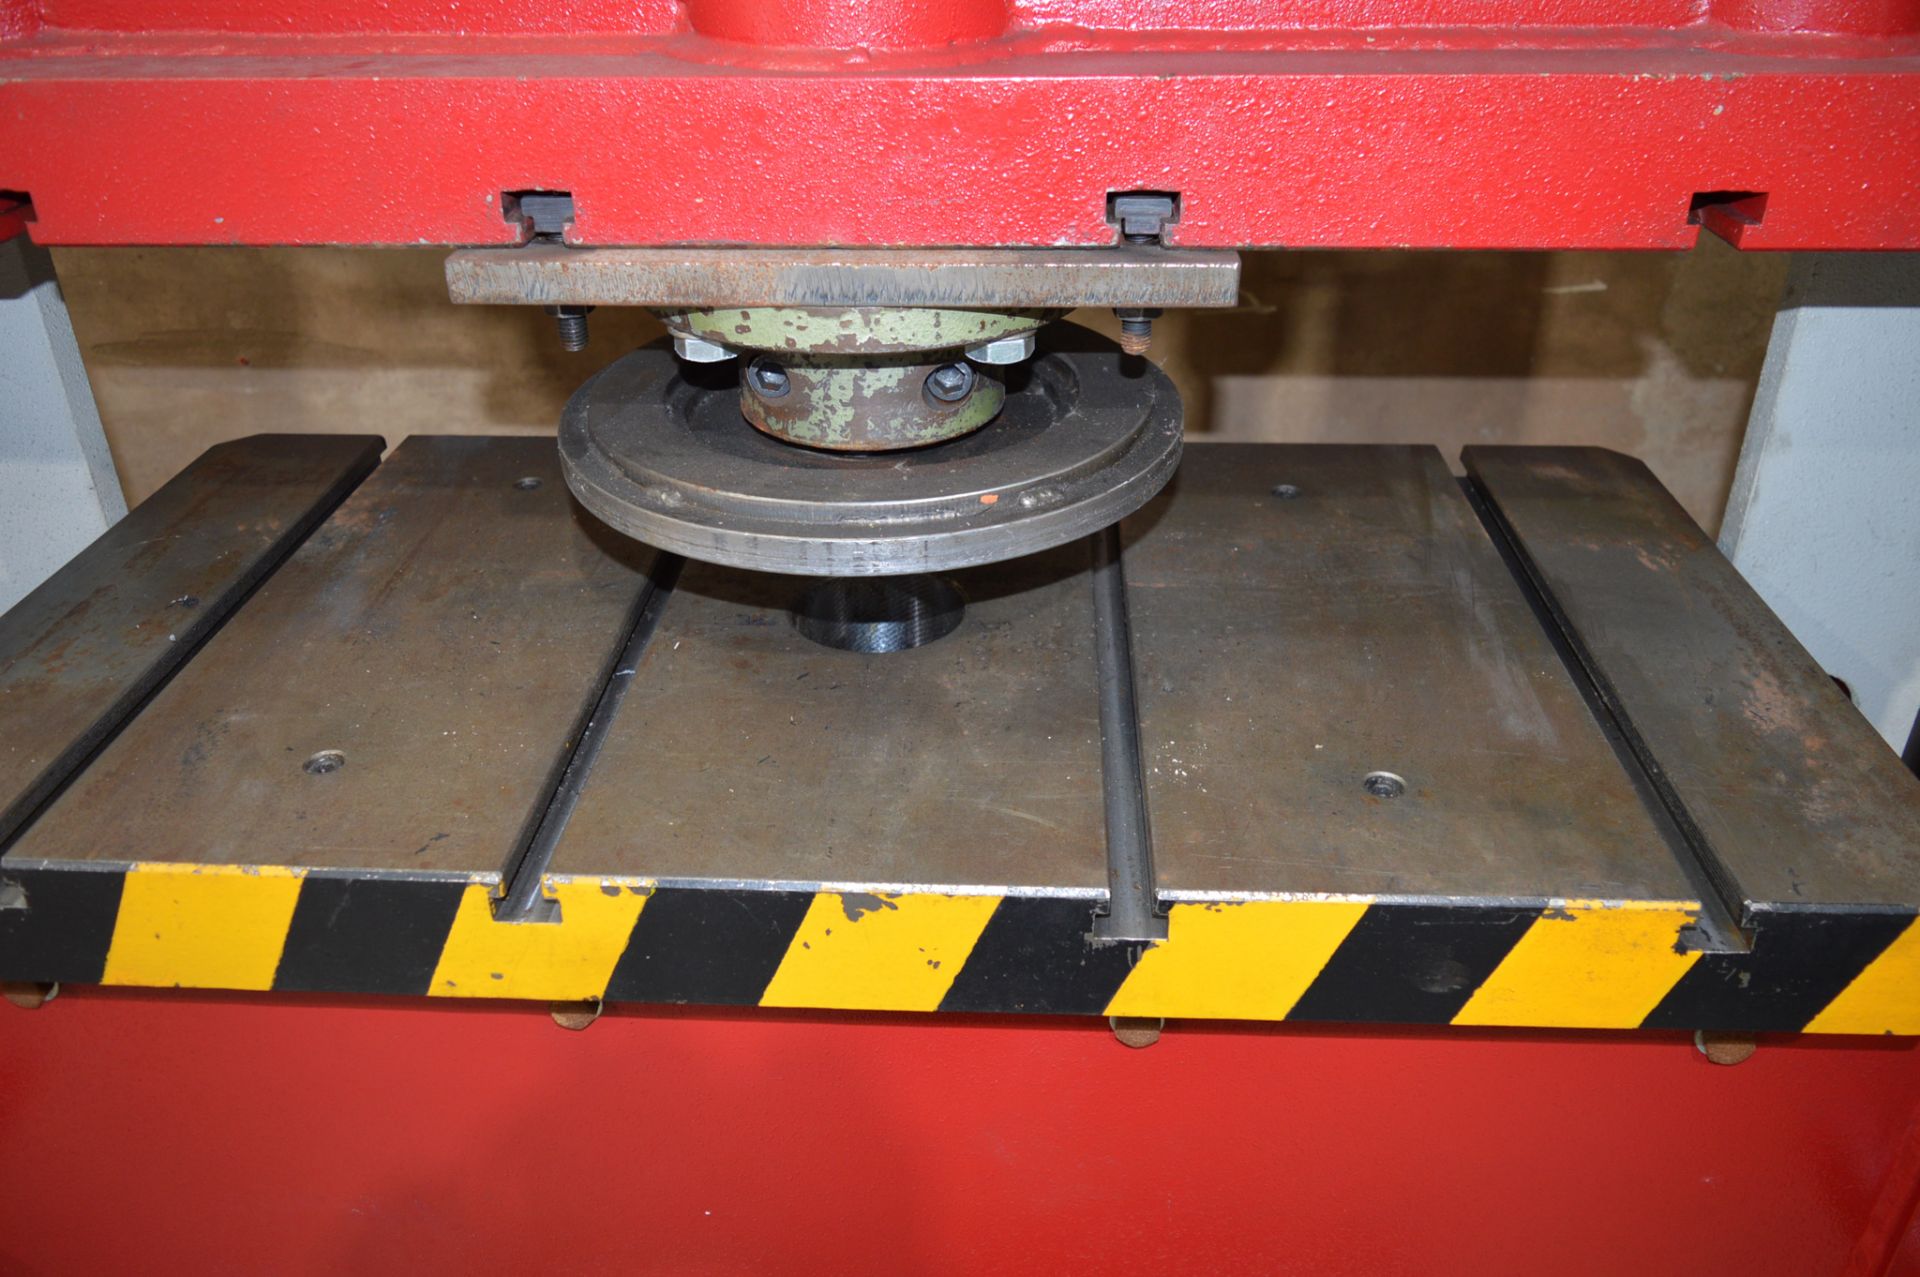 Morgan Rushworth HFPX 1020/100 universal H frame hydraulic press Distance between columns approx. - Image 3 of 7